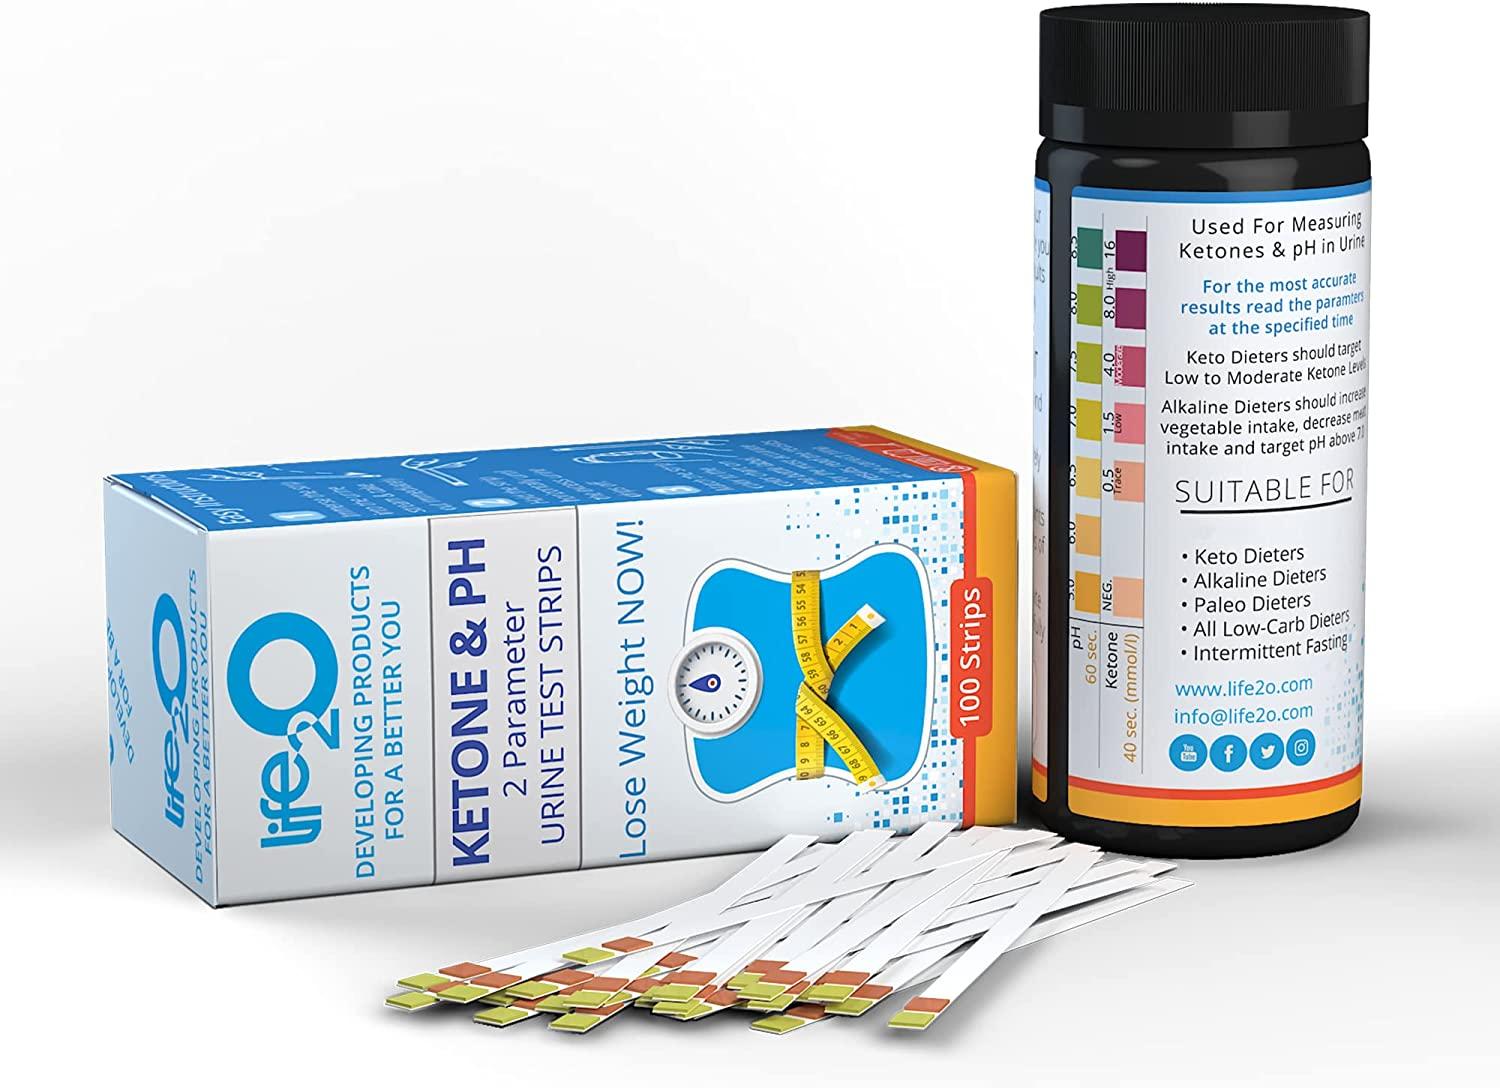 Perfect Keto Test Strips - Best for Testing Ketones India